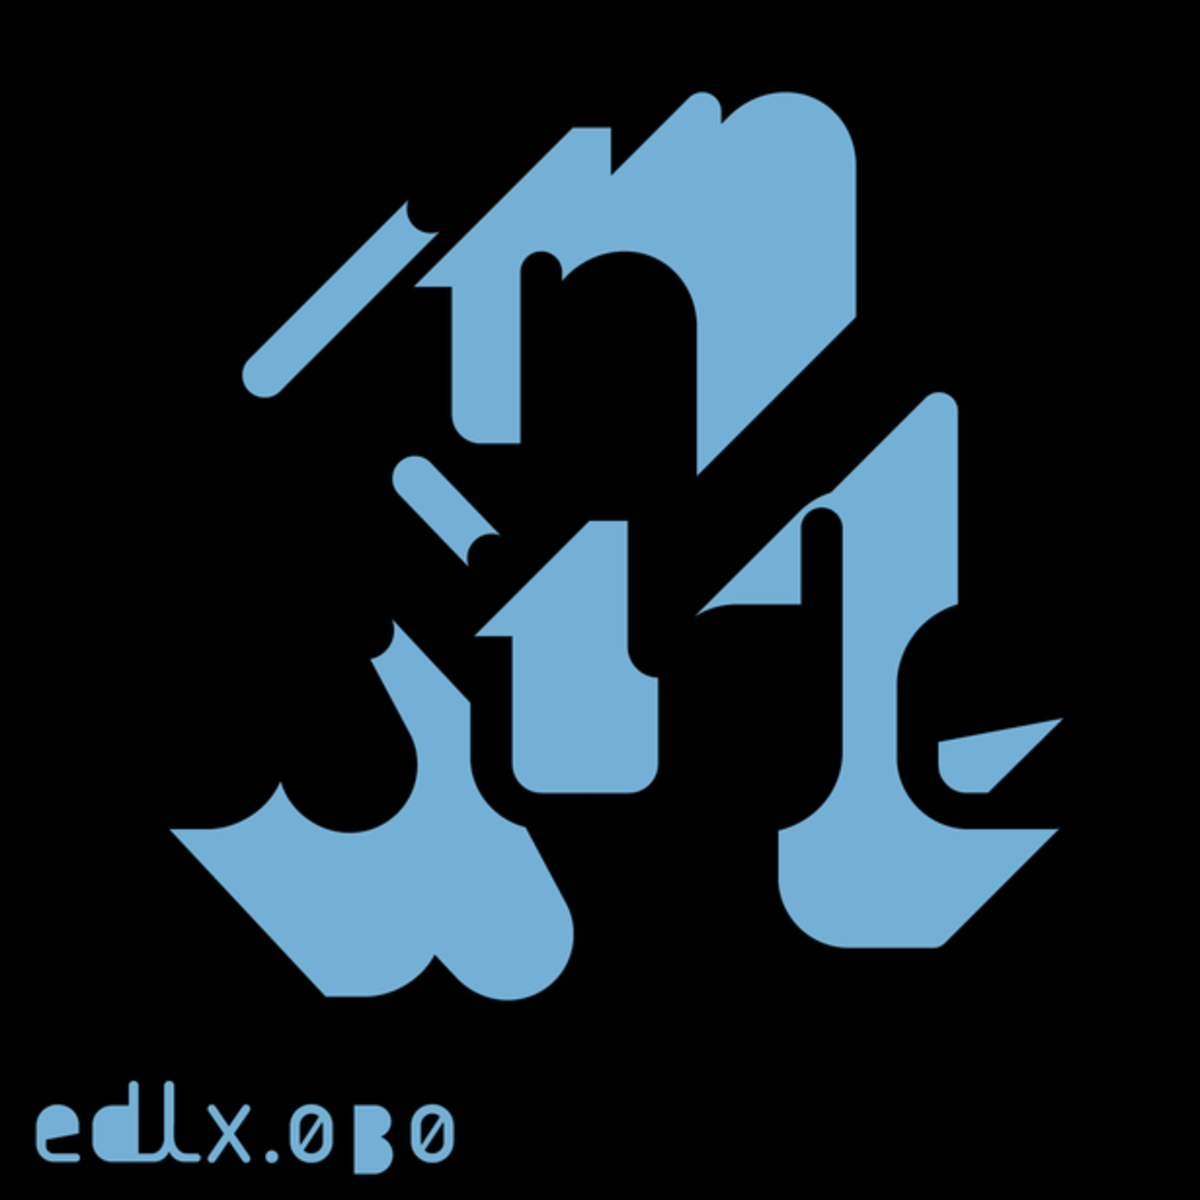 EDM News: New Electronic Music From Giorgio Gigli; Watch How EDLX Makes Laser Cut Vinyl Album Art